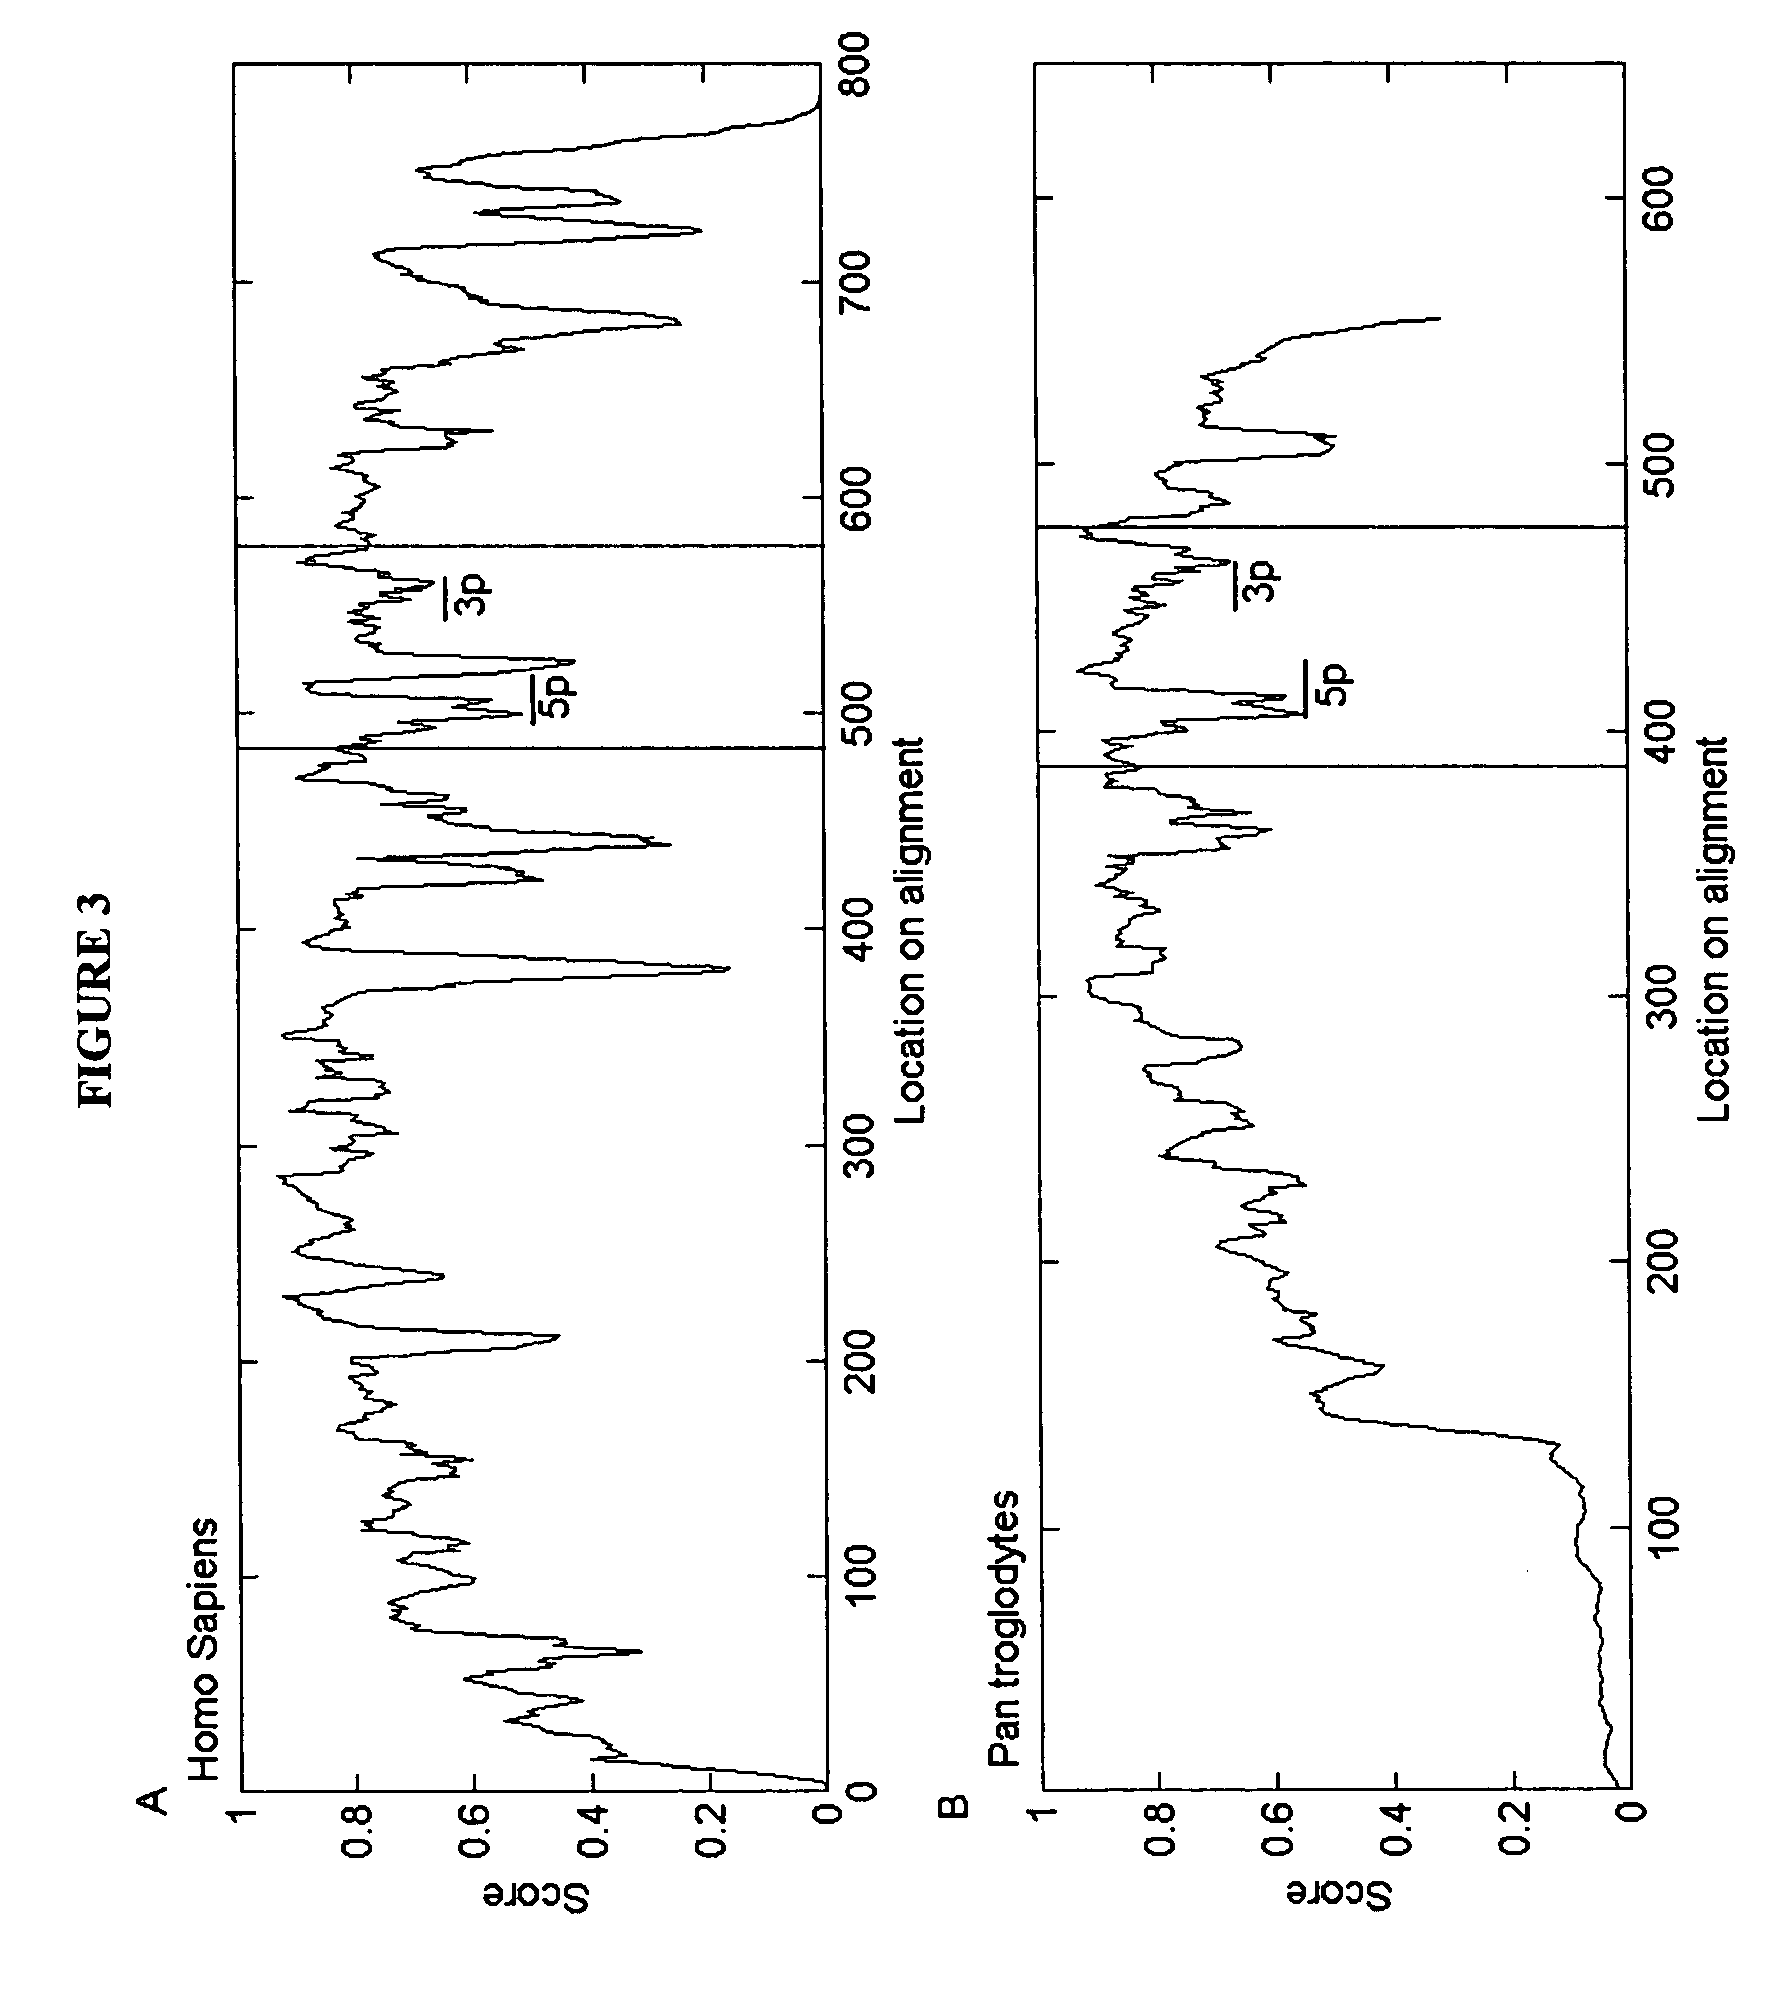 Micrornas and uses thereof